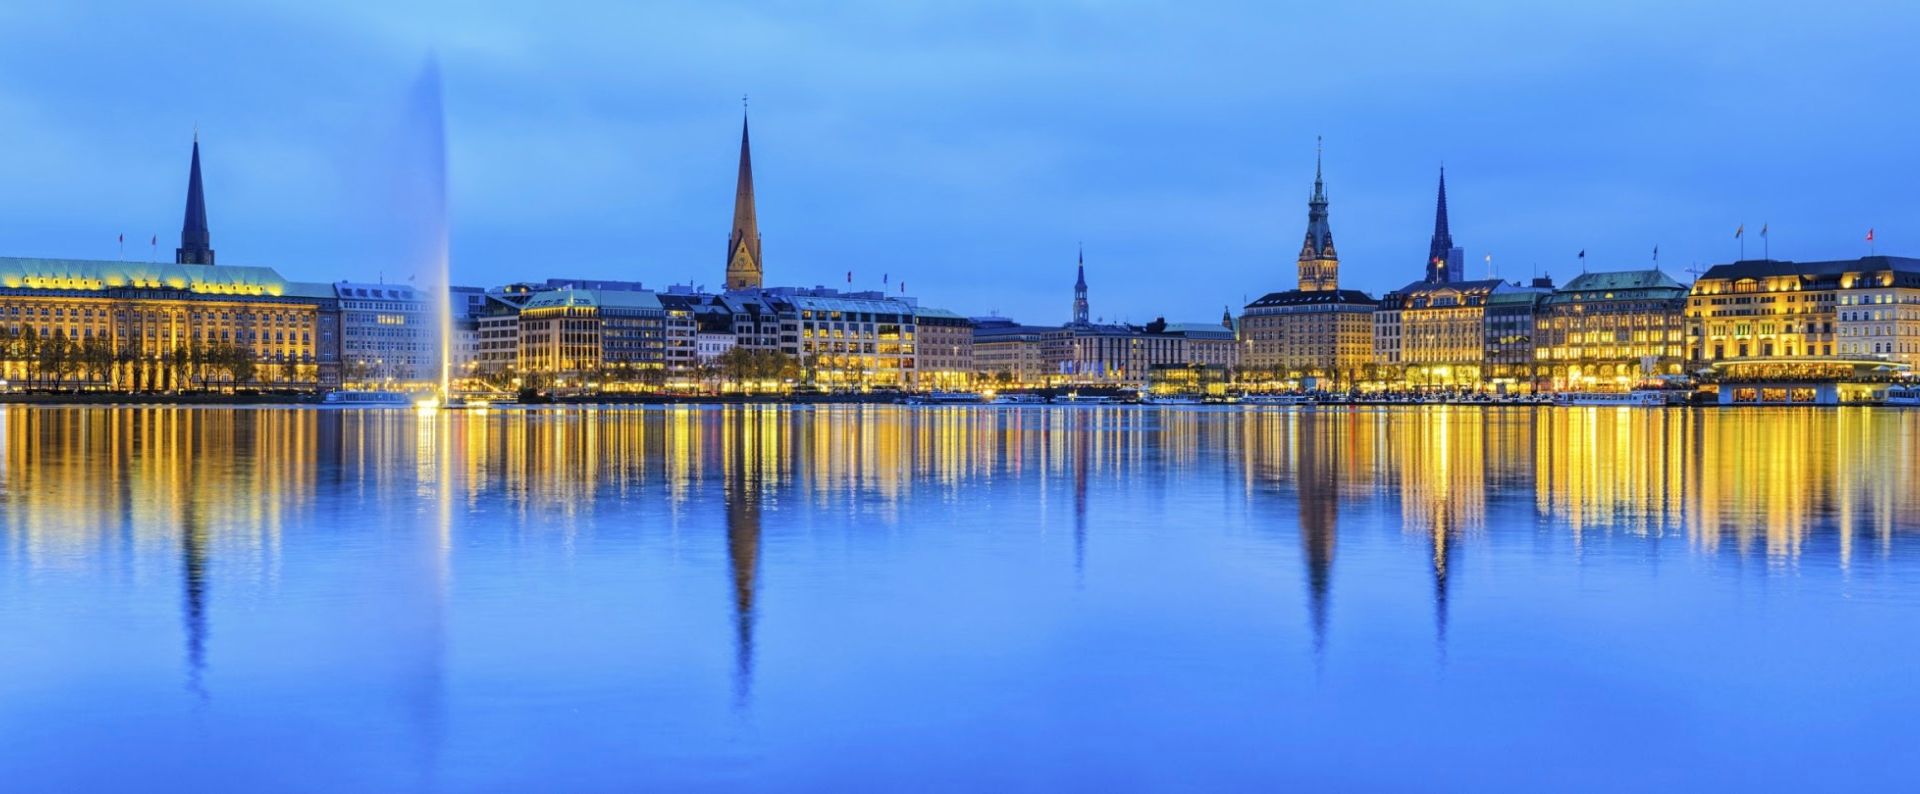 Hambourg - Allemagne ©Thinkstock